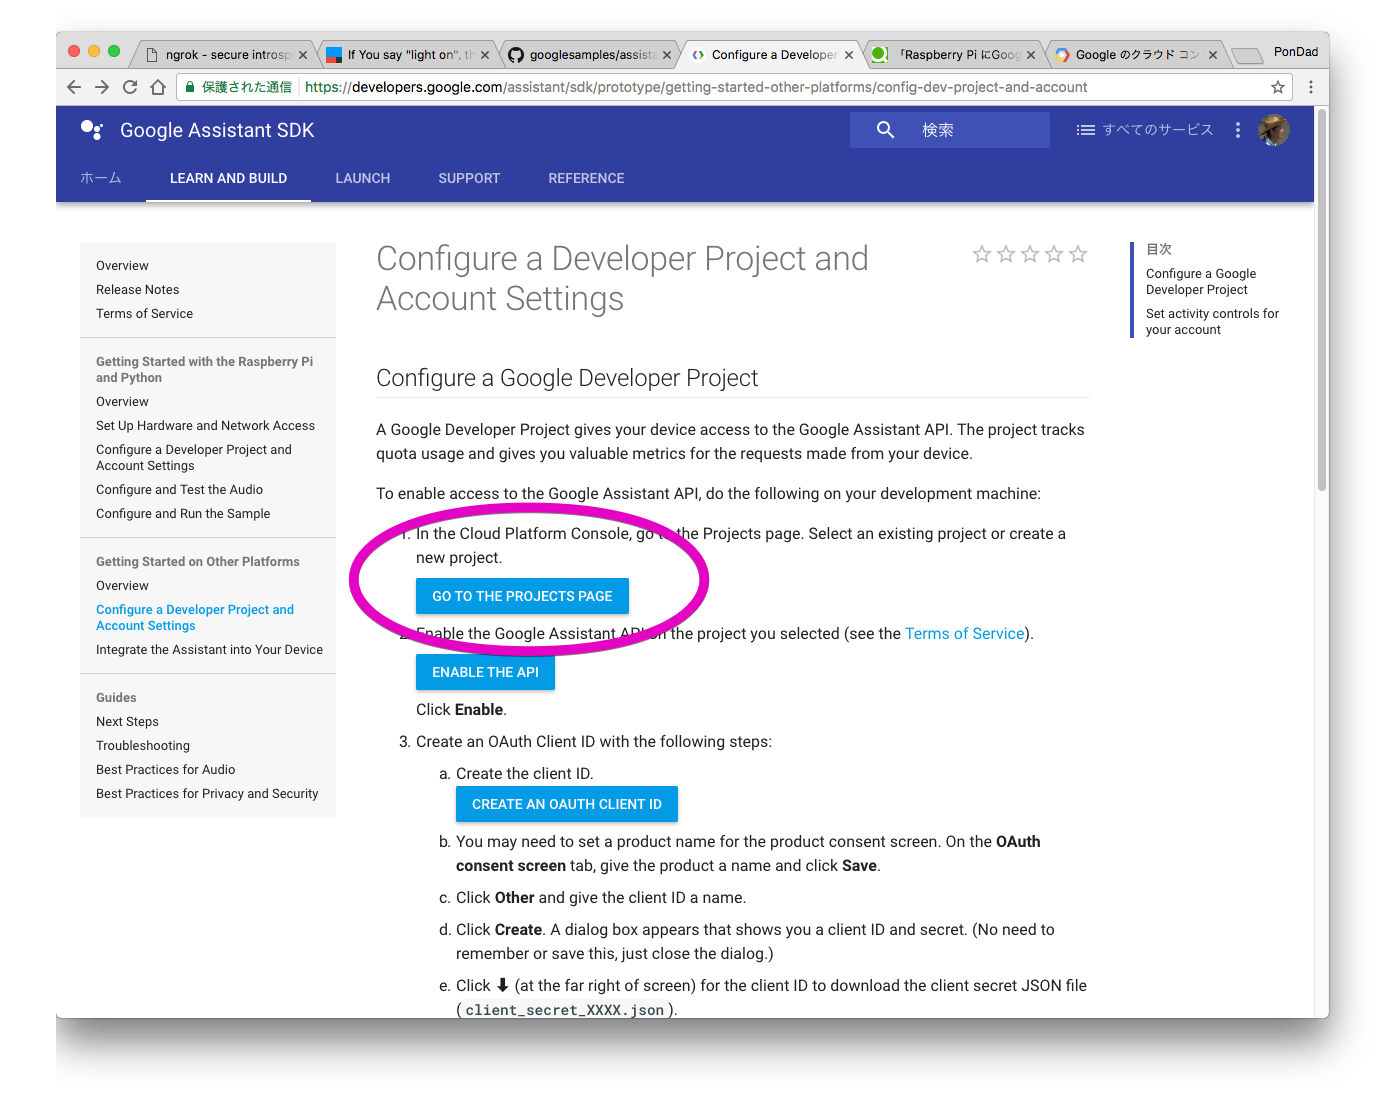 Configure a Developer Project and Account Settings  |  Google Assistant SDK  |  Google Developers 2017-04-29 23-07-20.png